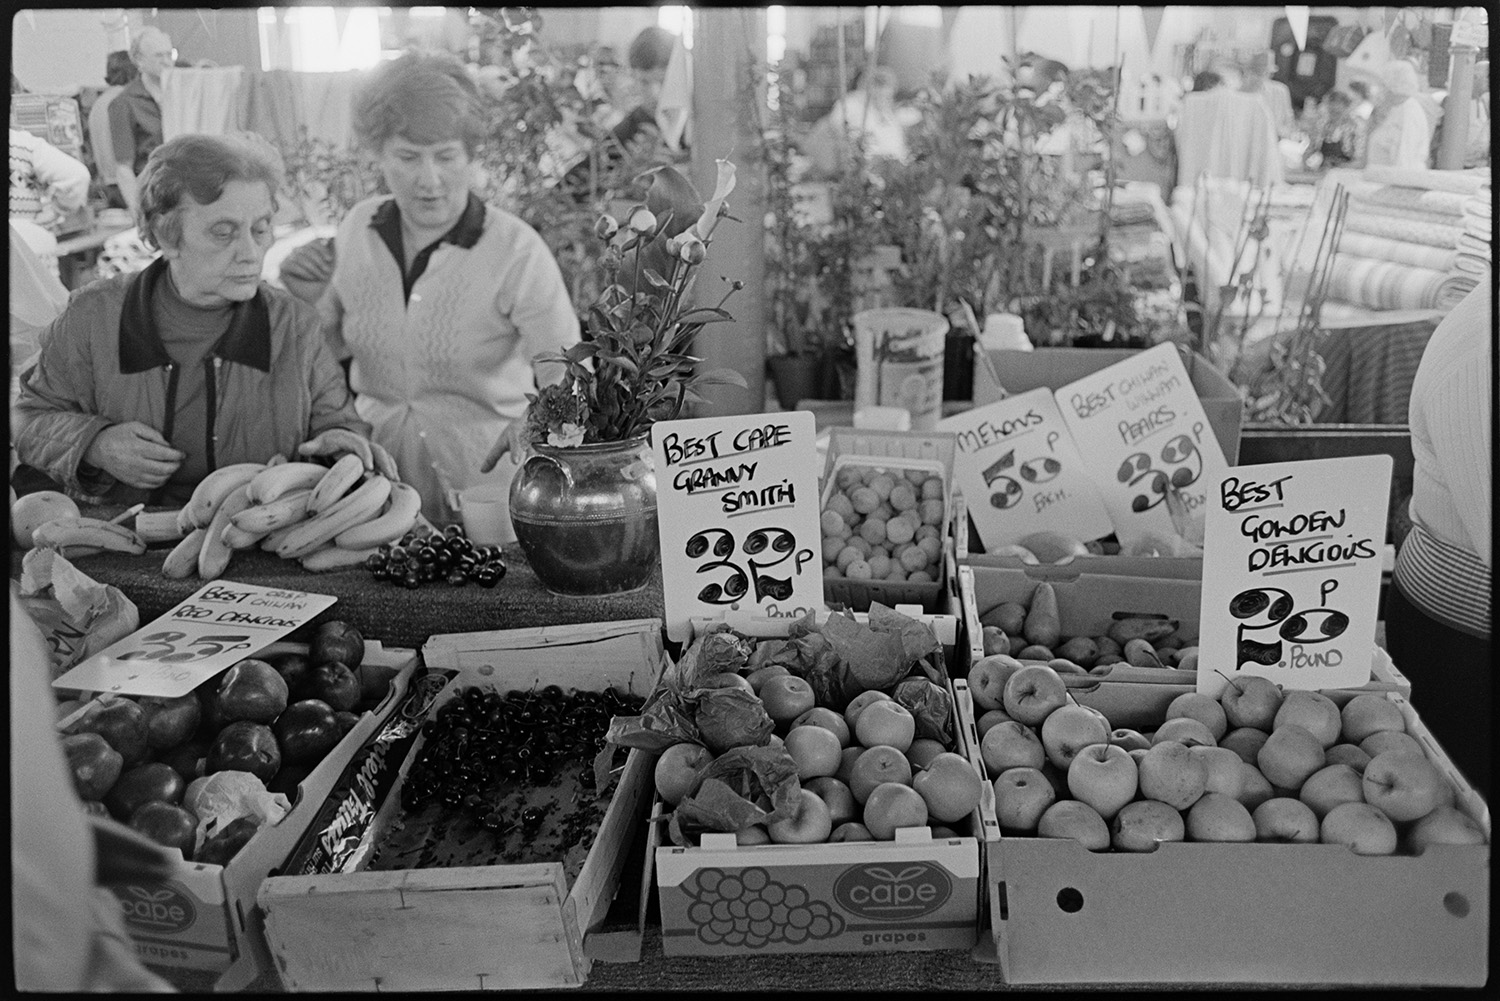 Fruit stall at Pannier Market showing price tags. 
[Two women looking at a fruit stall at Bideford Pannier Market selling apples, cherries, melons, bananas and pears. The prices of the fruit is advertised.]